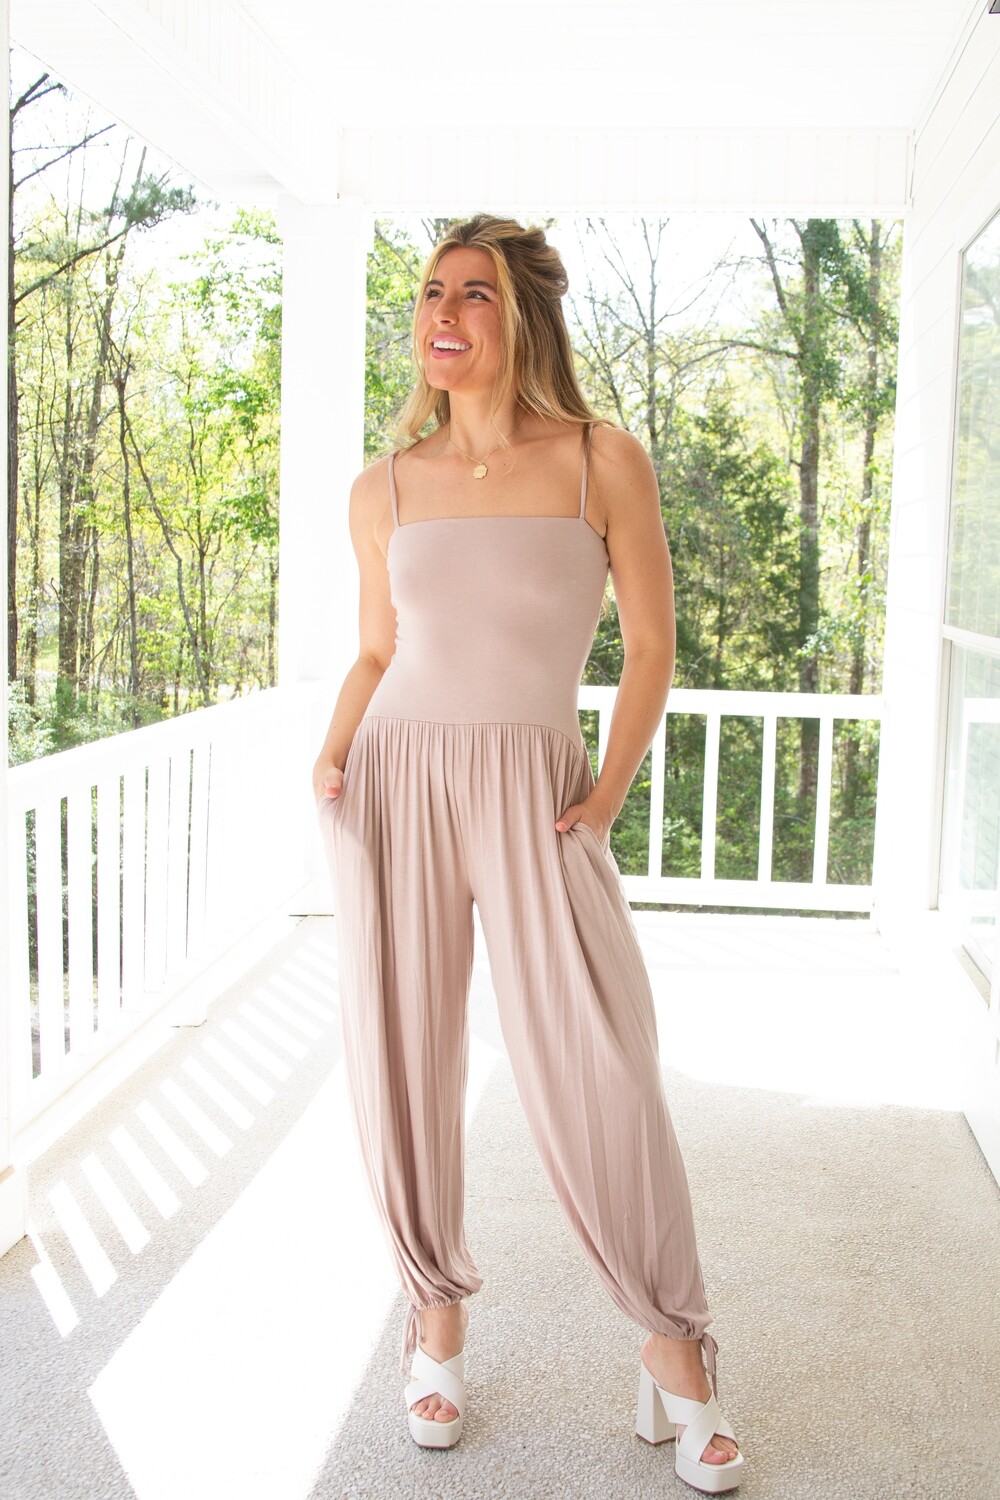 Sheila Square Neck Strappy Jumpsuit, Color: LT TAUPE, Size: SMALL